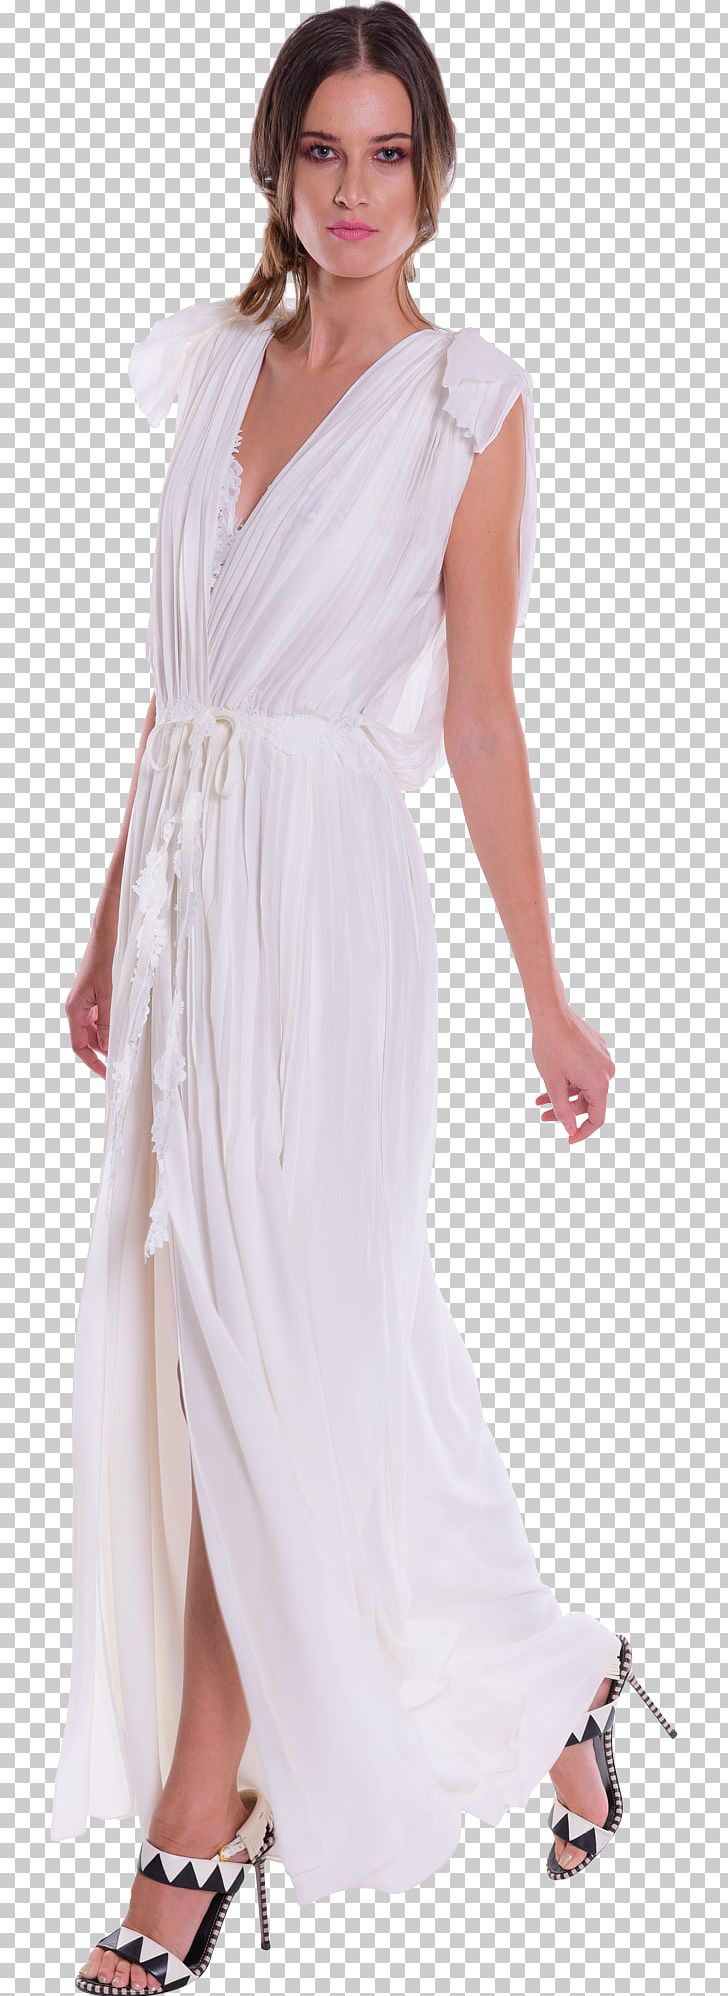 Party Dress Clothing Cocktail Dress Fashion PNG, Clipart, Bridal Party Dress, Bride, Clothing, Cocktail Dress, Costume Free PNG Download